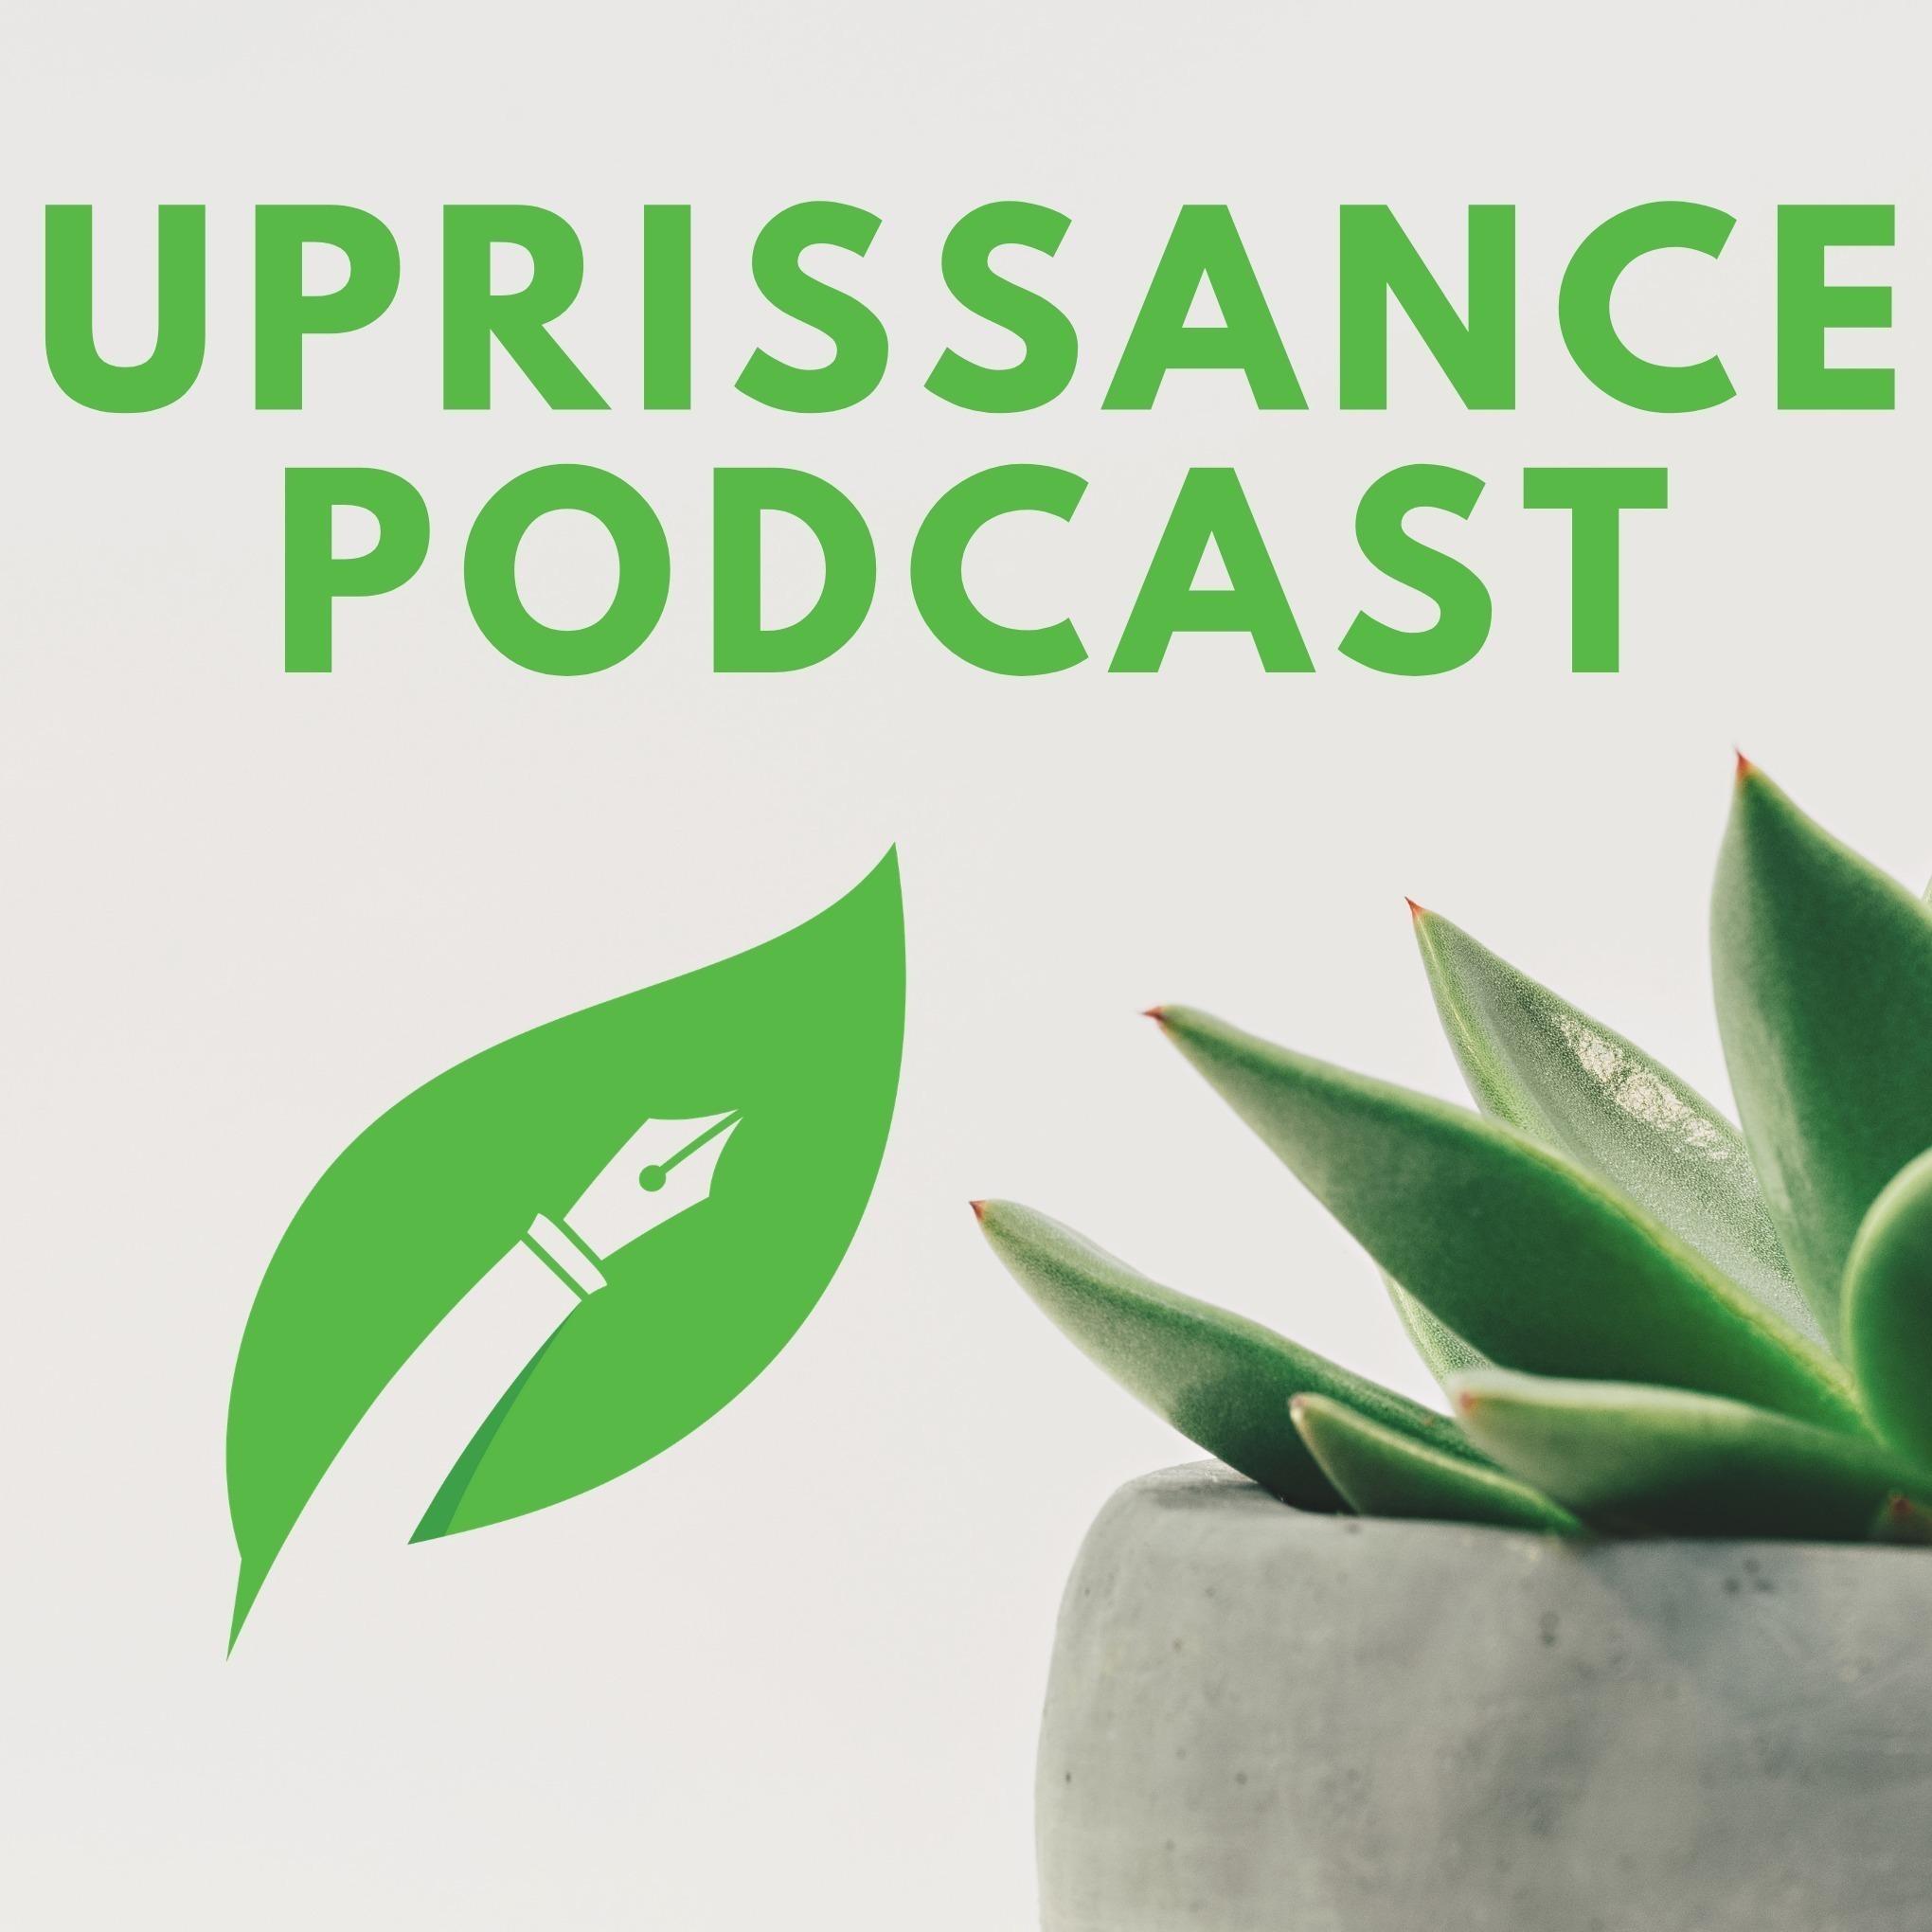 The Environmental Podcast; Uprissance